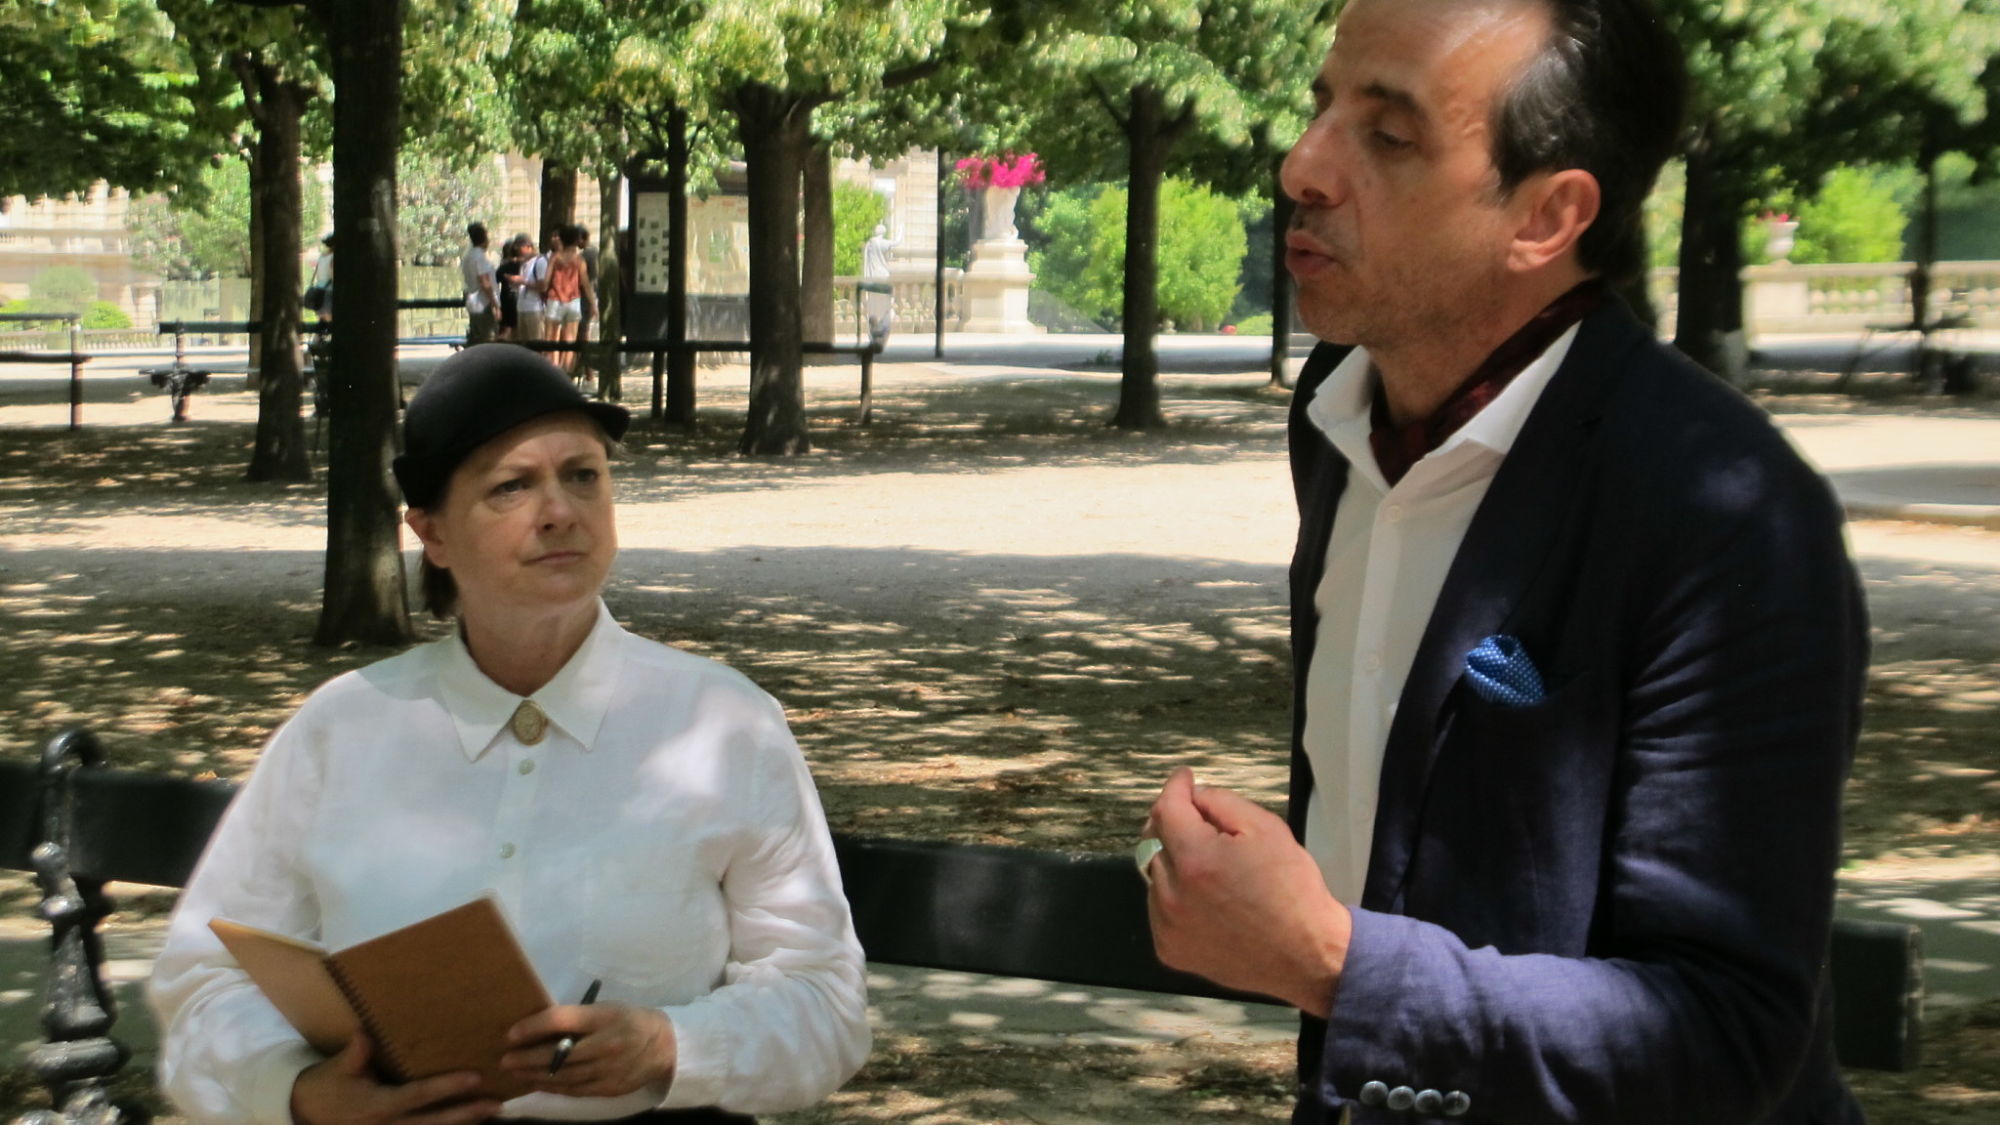 Gertrude Stein and Ernest Hemingway overheard by Papa's Paris Tour guests in the Luxembourg Gardens, Paris.